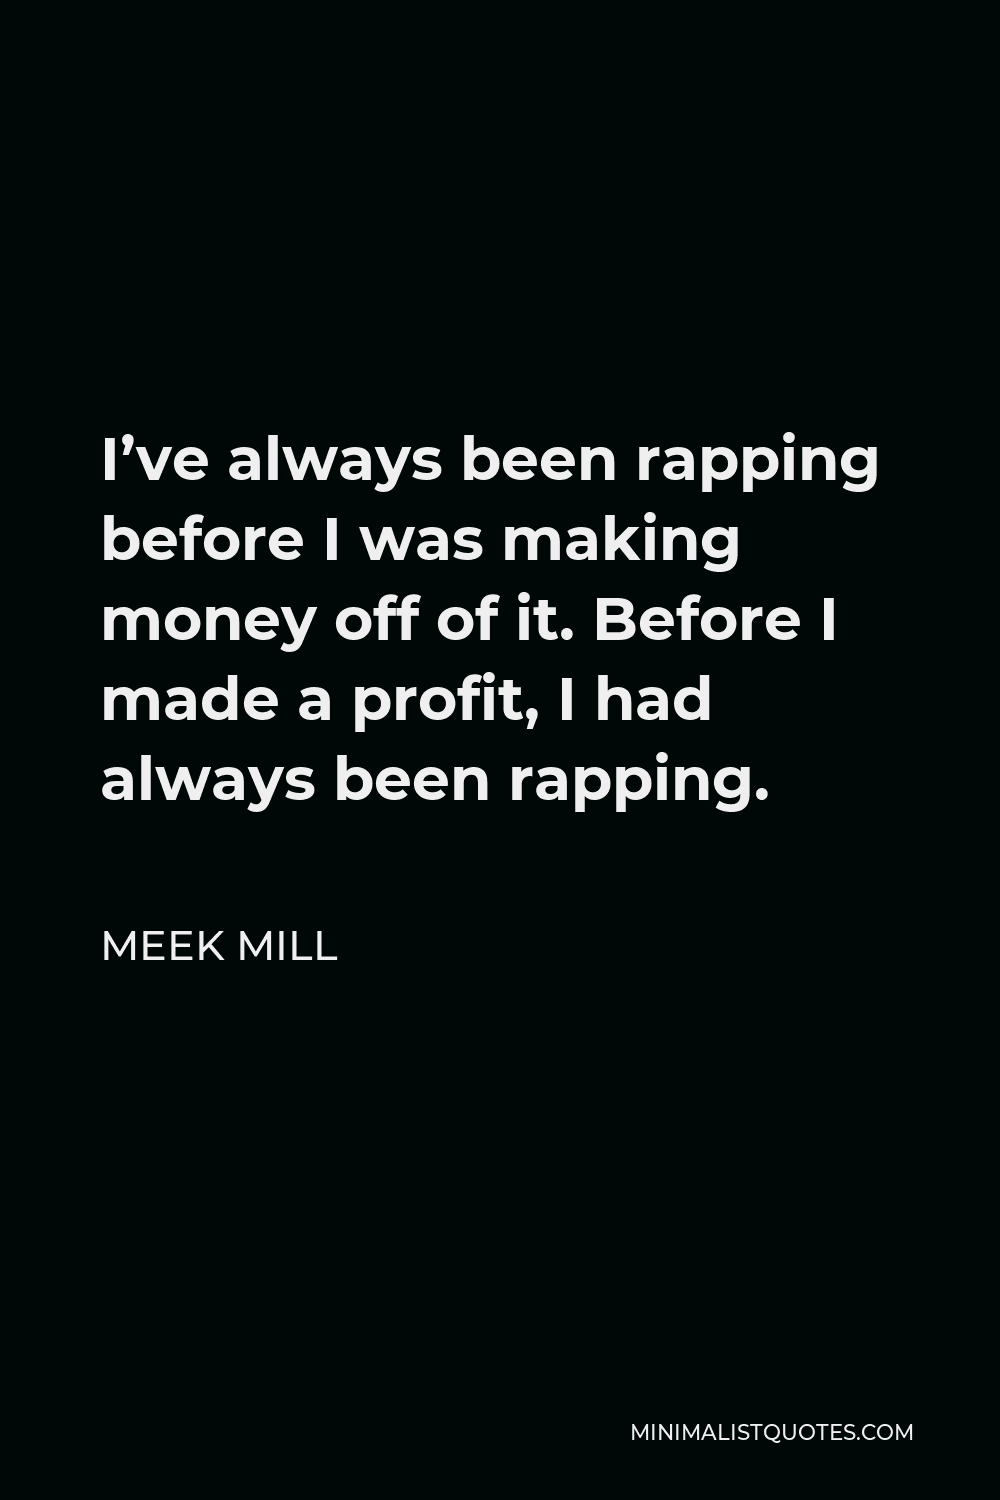 Meek Mill Quote - I’ve always been rapping before I was making money off of it. Before I made a profit, I had always been rapping.